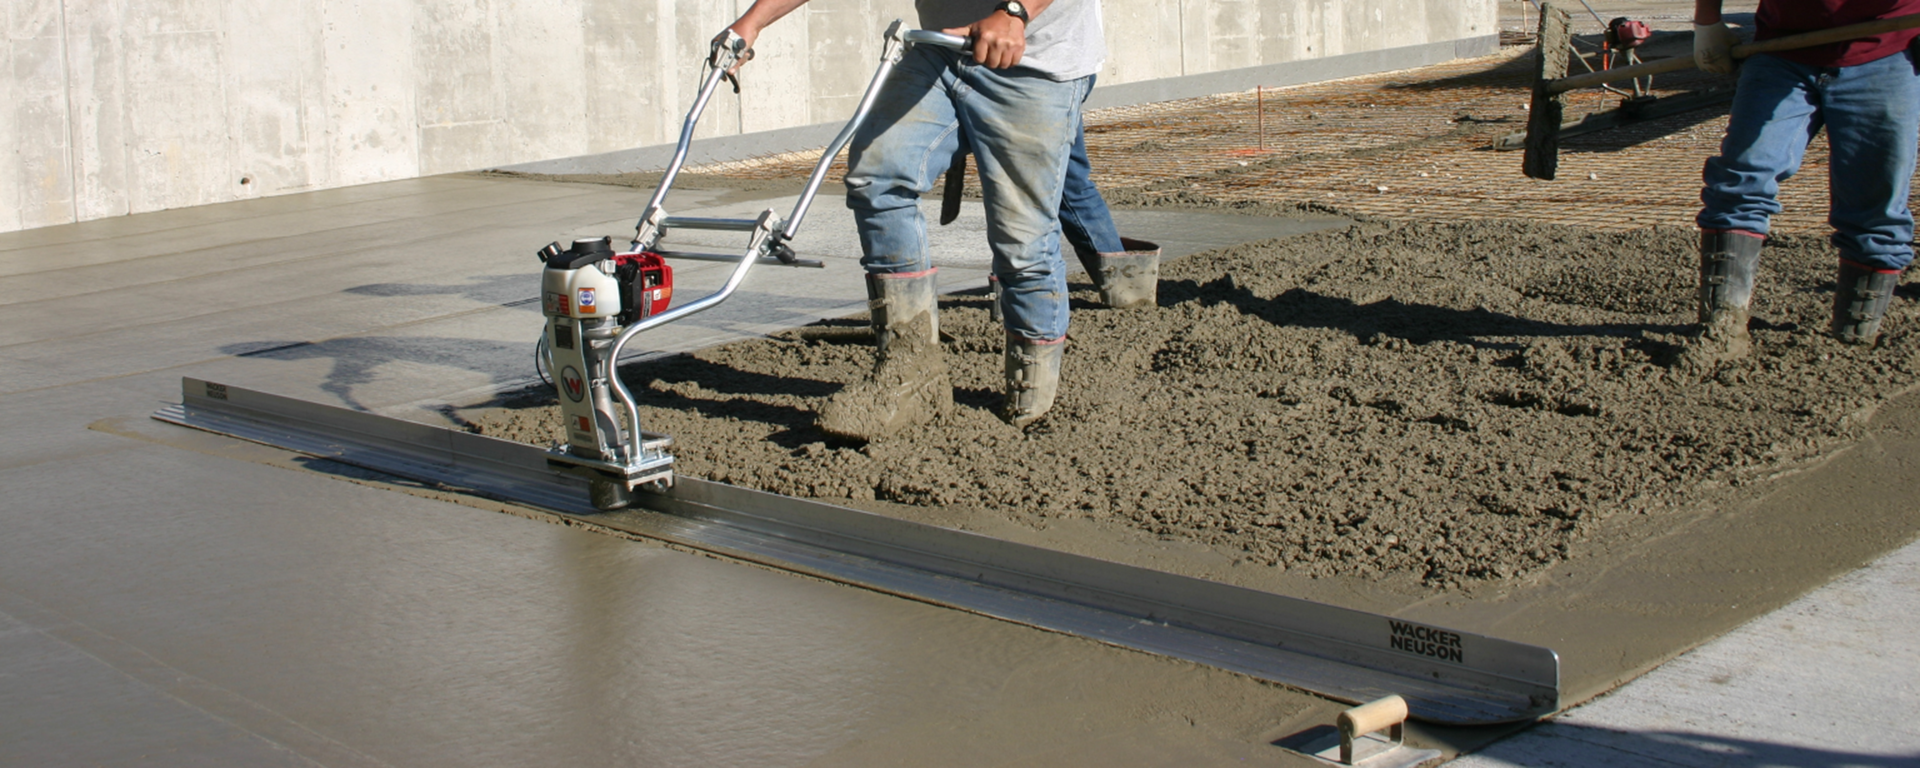 Hand-guided screed  P35A